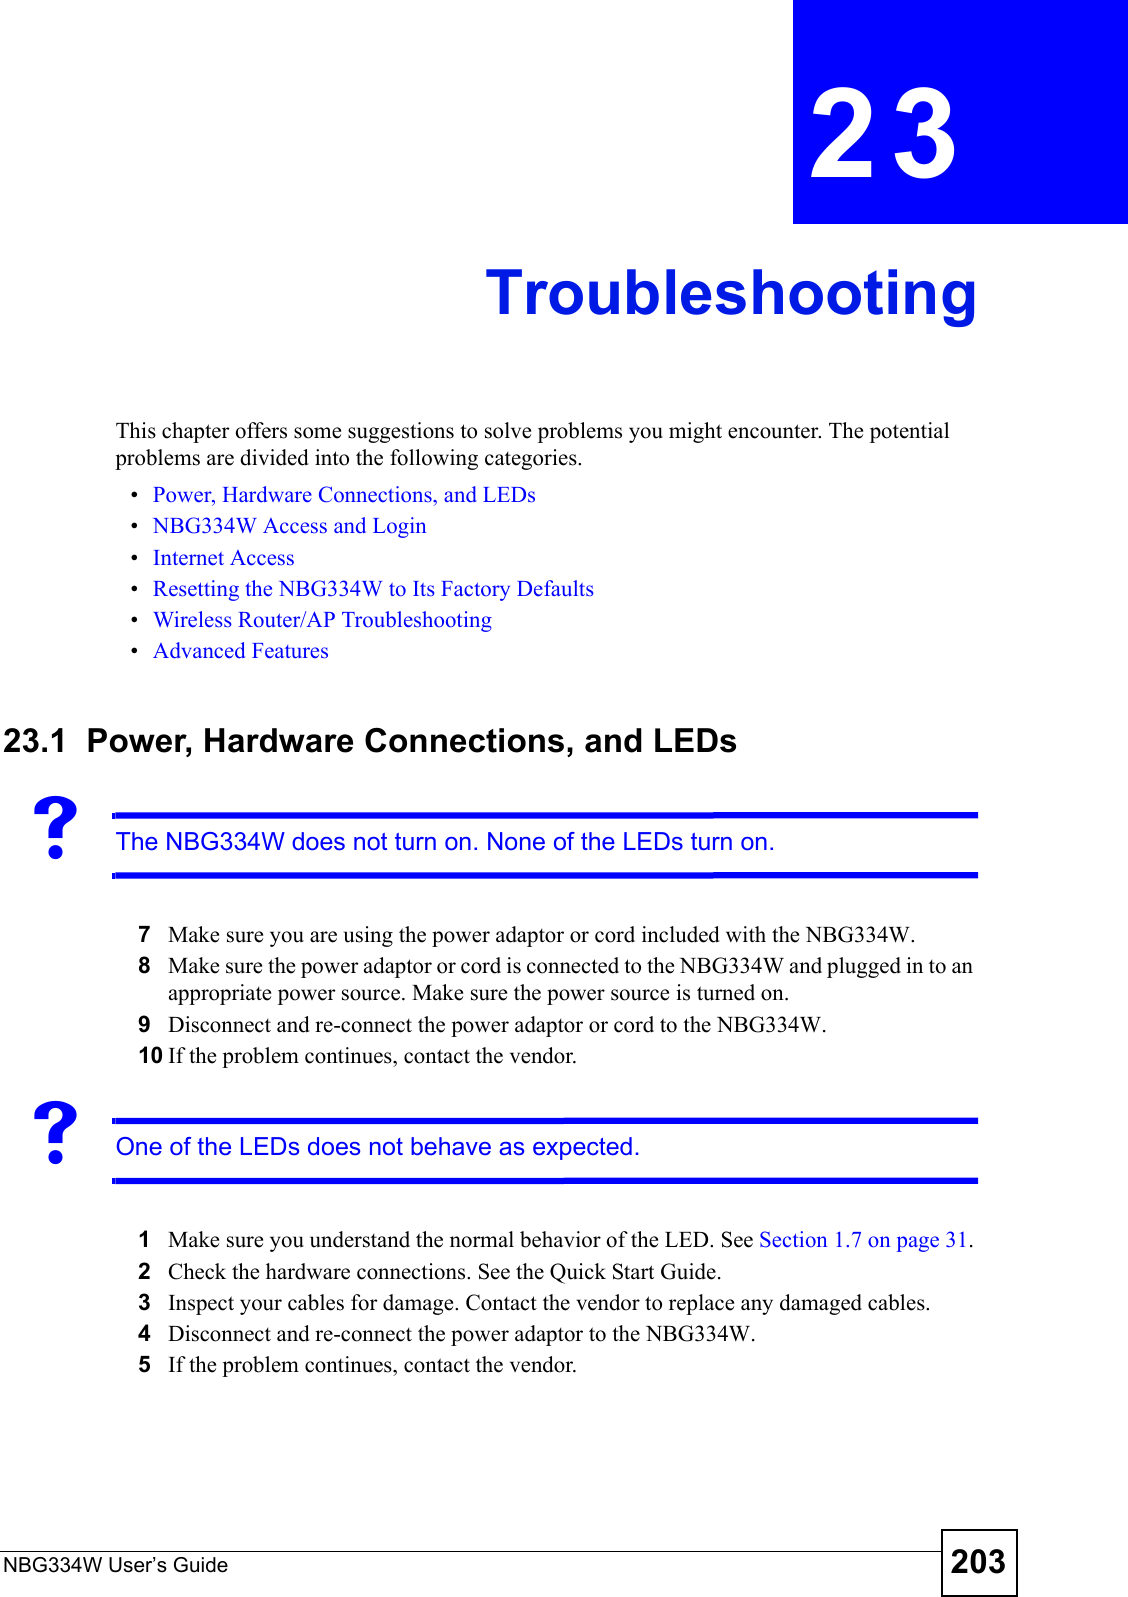 NBG334W User’s Guide 203CHAPTER  23 TroubleshootingThis chapter offers some suggestions to solve problems you might encounter. The potential problems are divided into the following categories. •Power, Hardware Connections, and LEDs•NBG334W Access and Login•Internet Access•Resetting the NBG334W to Its Factory Defaults•Wireless Router/AP Troubleshooting•Advanced Features23.1  Power, Hardware Connections, and LEDsVThe NBG334W does not turn on. None of the LEDs turn on.7Make sure you are using the power adaptor or cord included with the NBG334W.8Make sure the power adaptor or cord is connected to the NBG334W and plugged in to an appropriate power source. Make sure the power source is turned on.9Disconnect and re-connect the power adaptor or cord to the NBG334W. 10 If the problem continues, contact the vendor.VOne of the LEDs does not behave as expected.1Make sure you understand the normal behavior of the LED. See Section 1.7 on page 31.2Check the hardware connections. See the Quick Start Guide. 3Inspect your cables for damage. Contact the vendor to replace any damaged cables.4Disconnect and re-connect the power adaptor to the NBG334W. 5If the problem continues, contact the vendor.